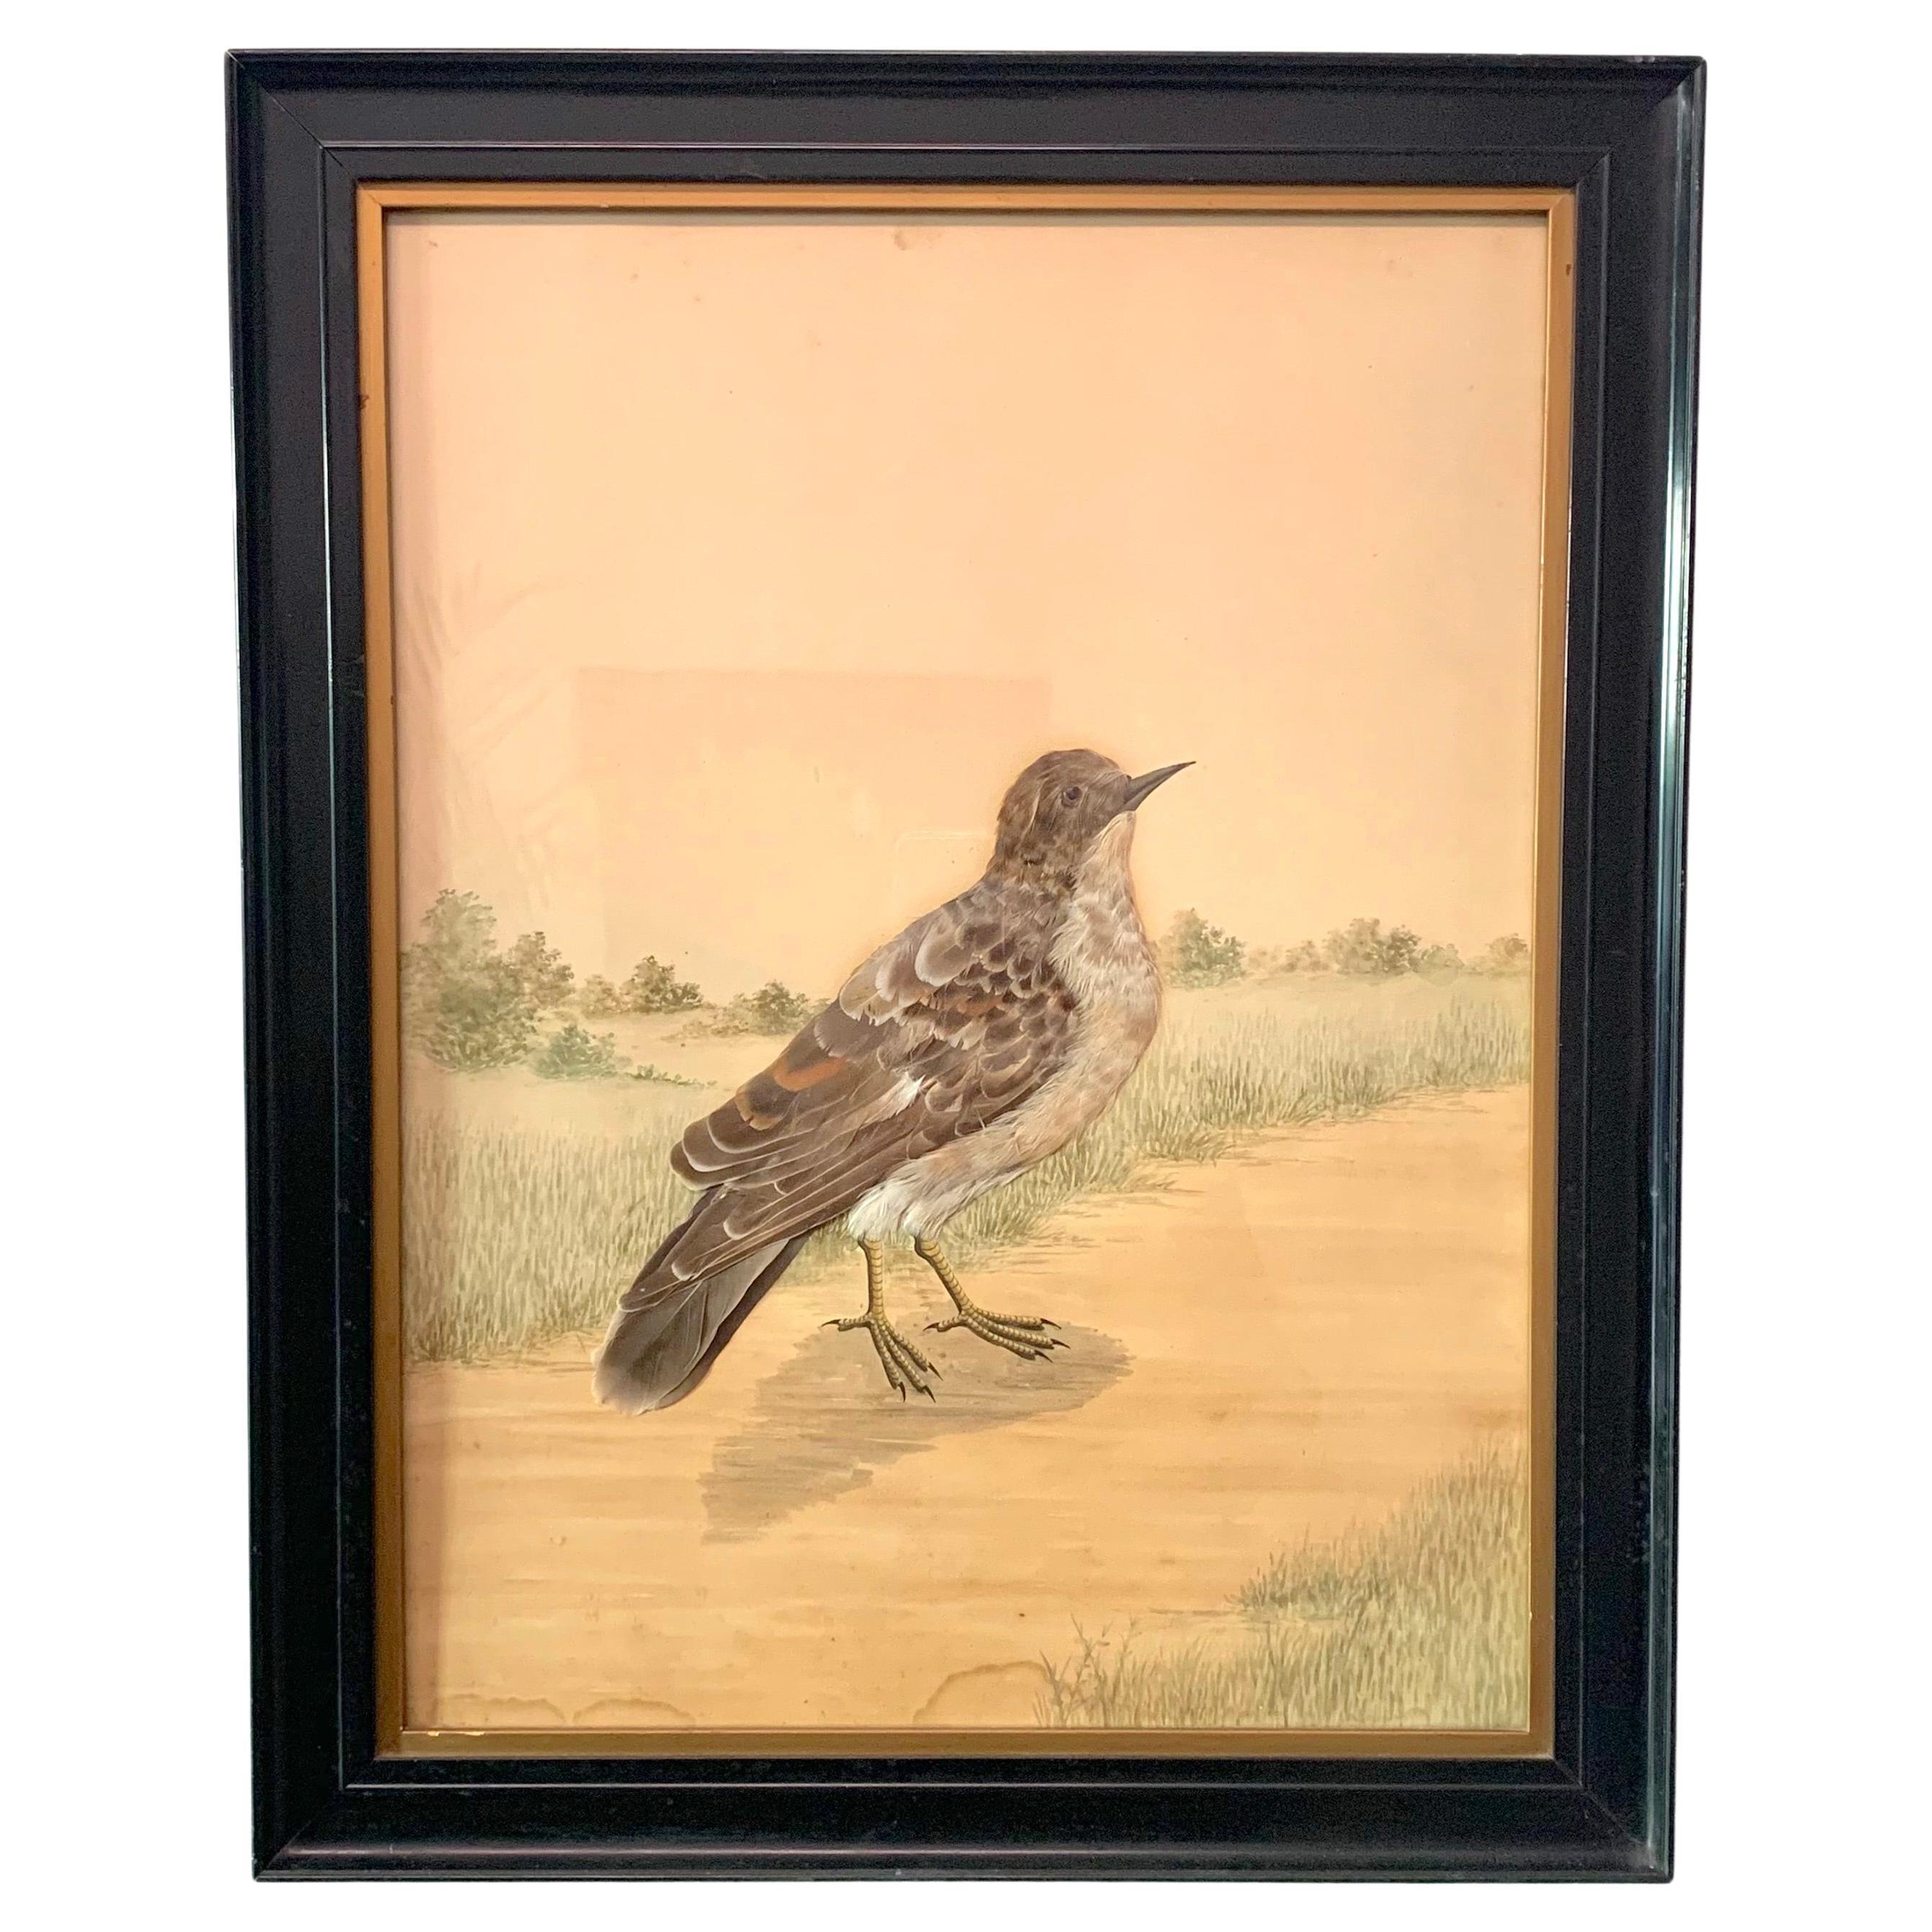 Antique Collage of a Bird Feathers on Watercolour For Sale